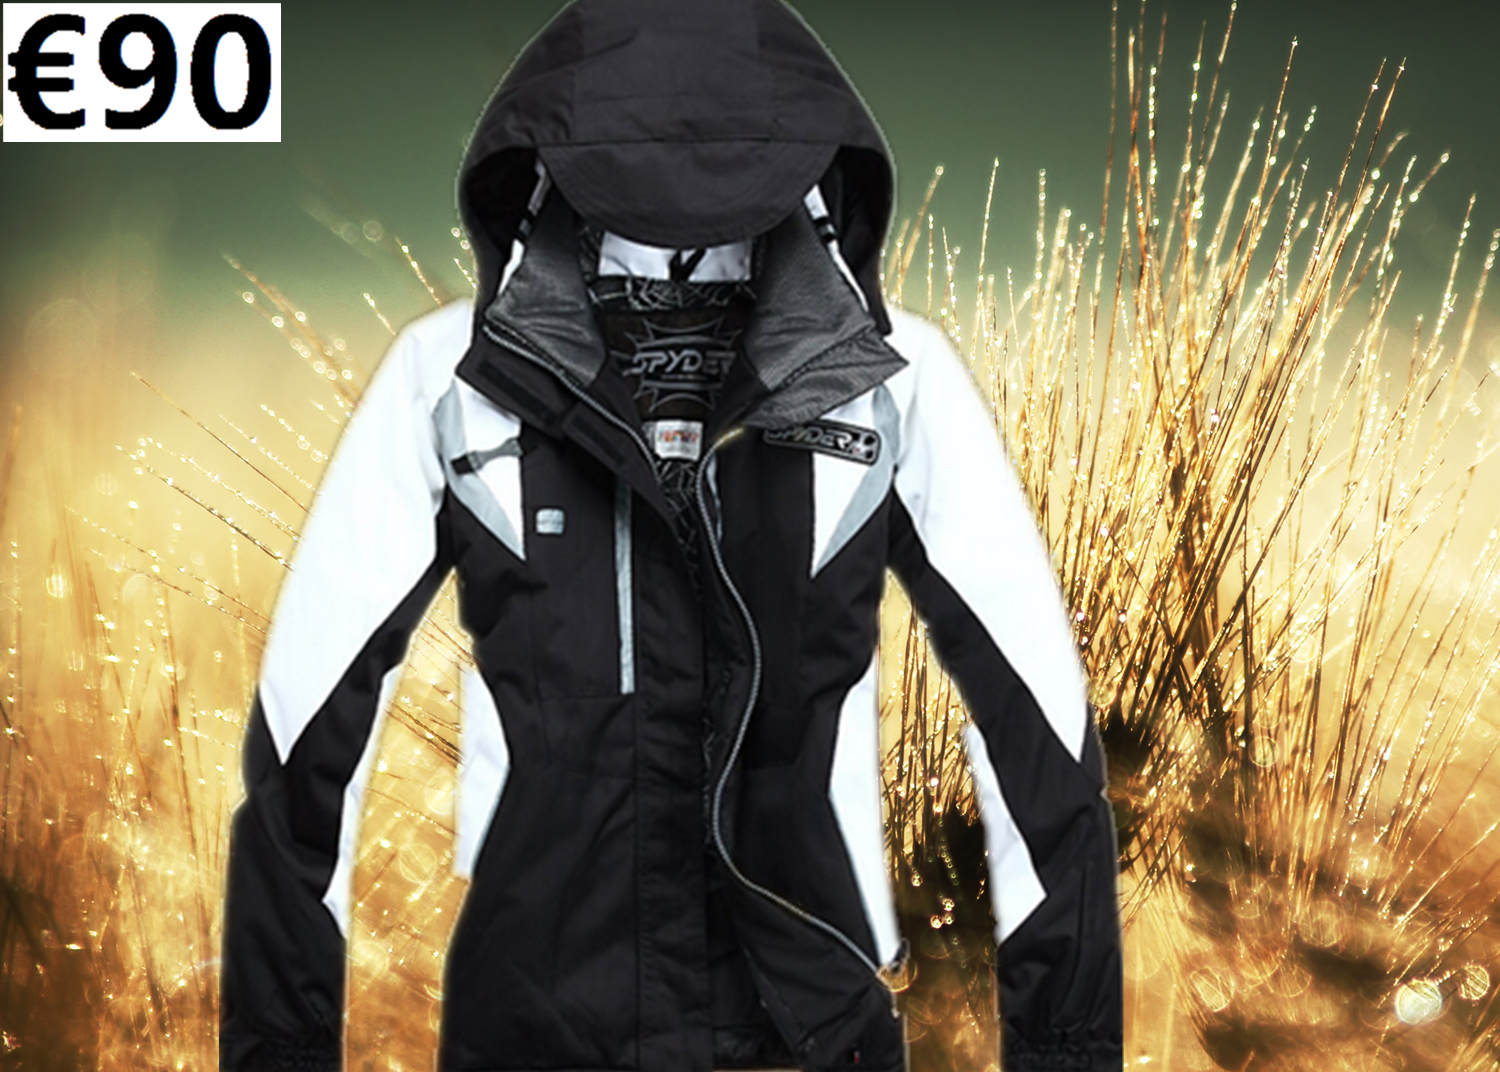 womens snowboarding jackets uk sale on clearance: August 2015